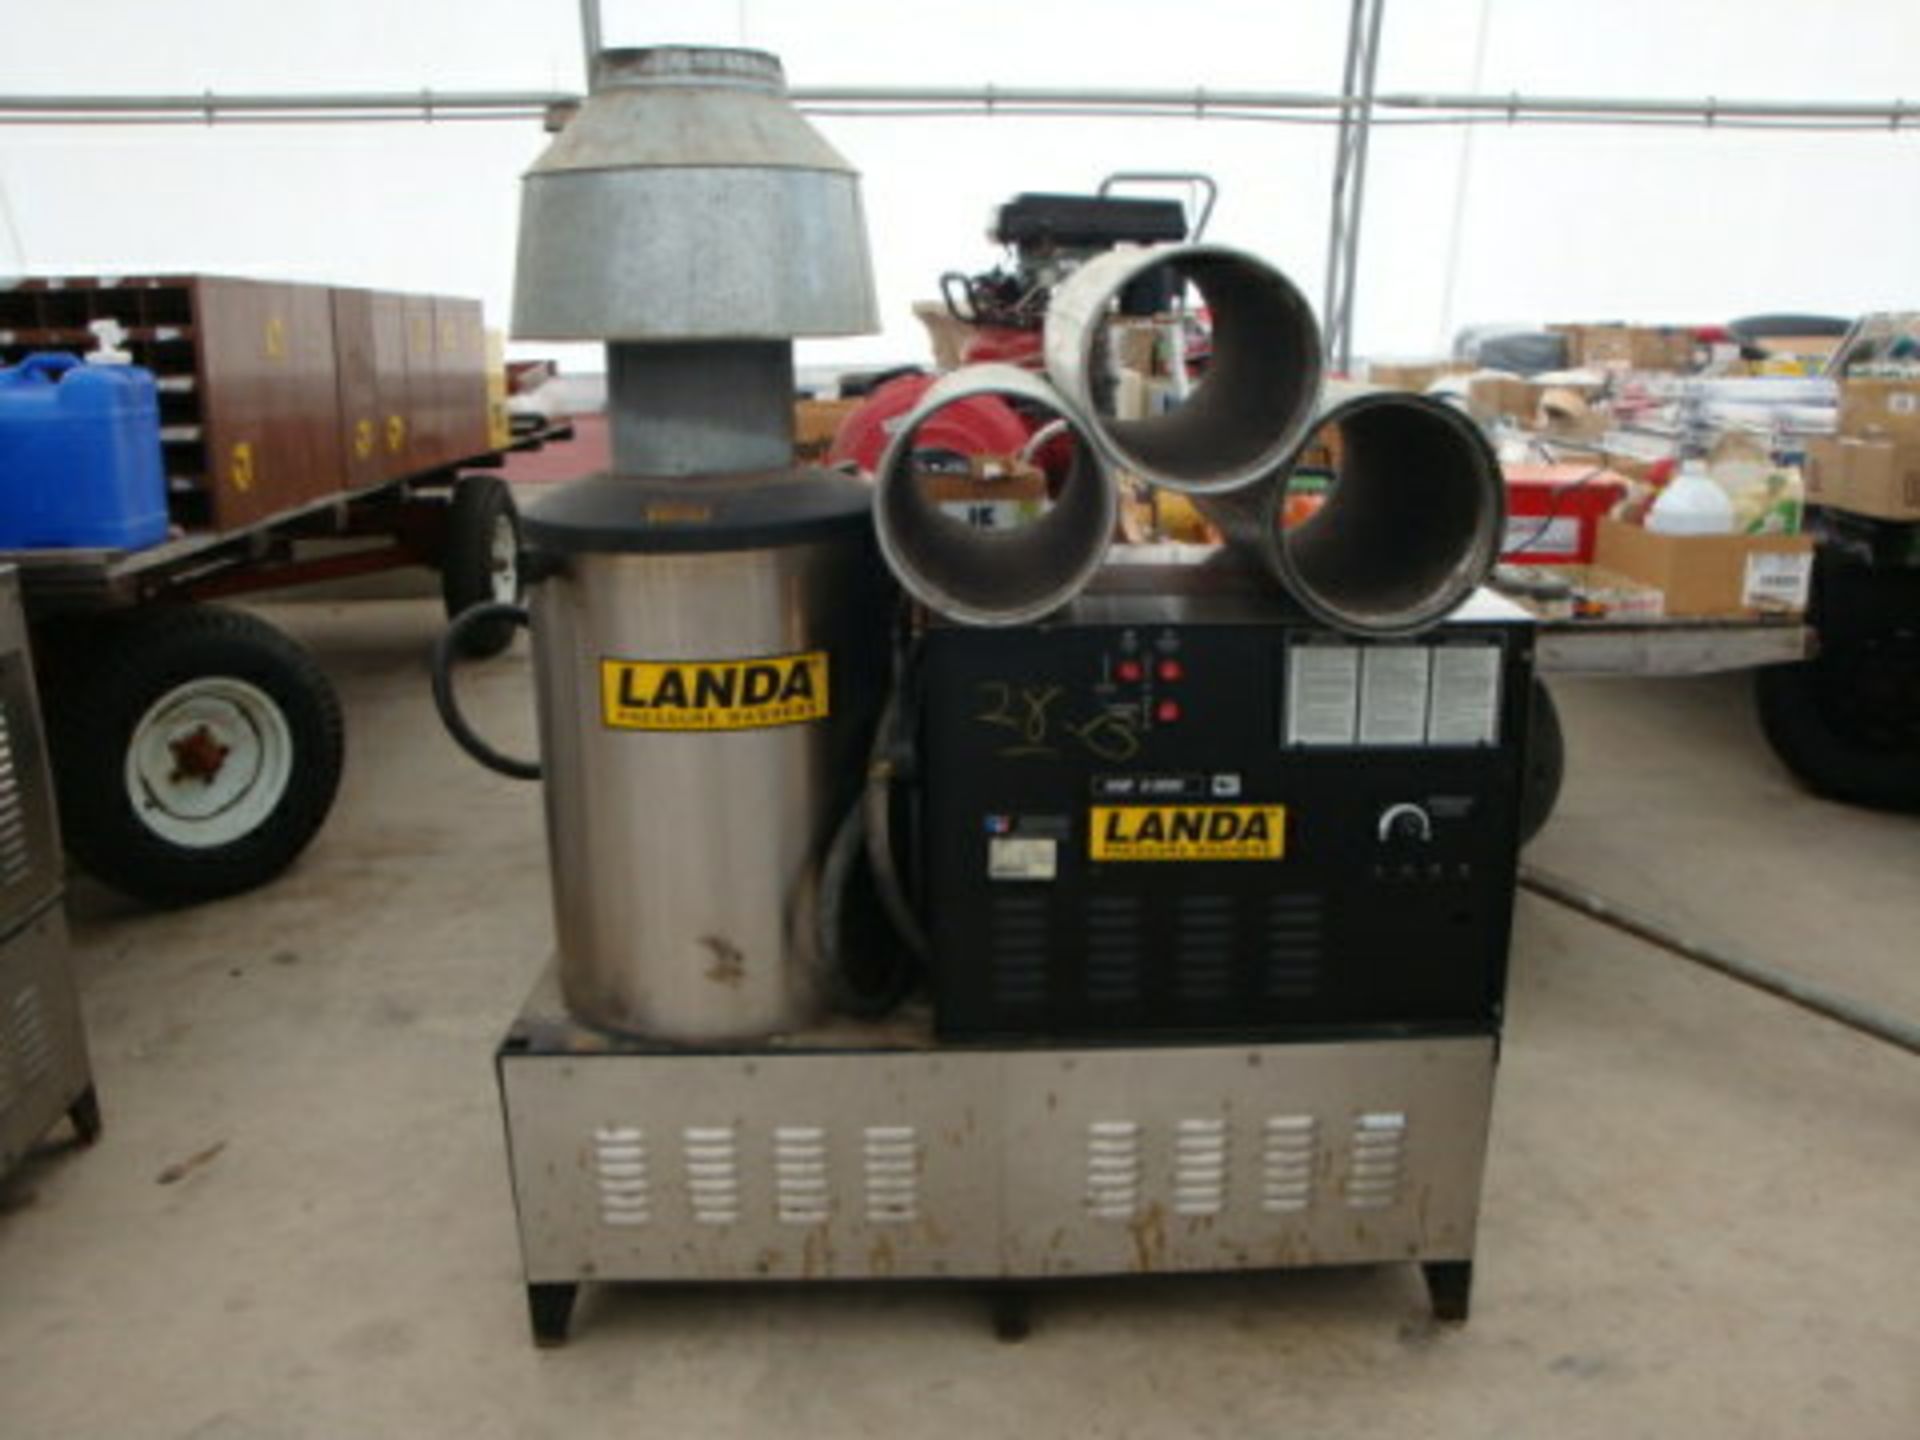 (Lot 28b) Landa Cleaning systems VHP 5-3000, 3000 PSI power washer, 5gal/minute w/propane burner